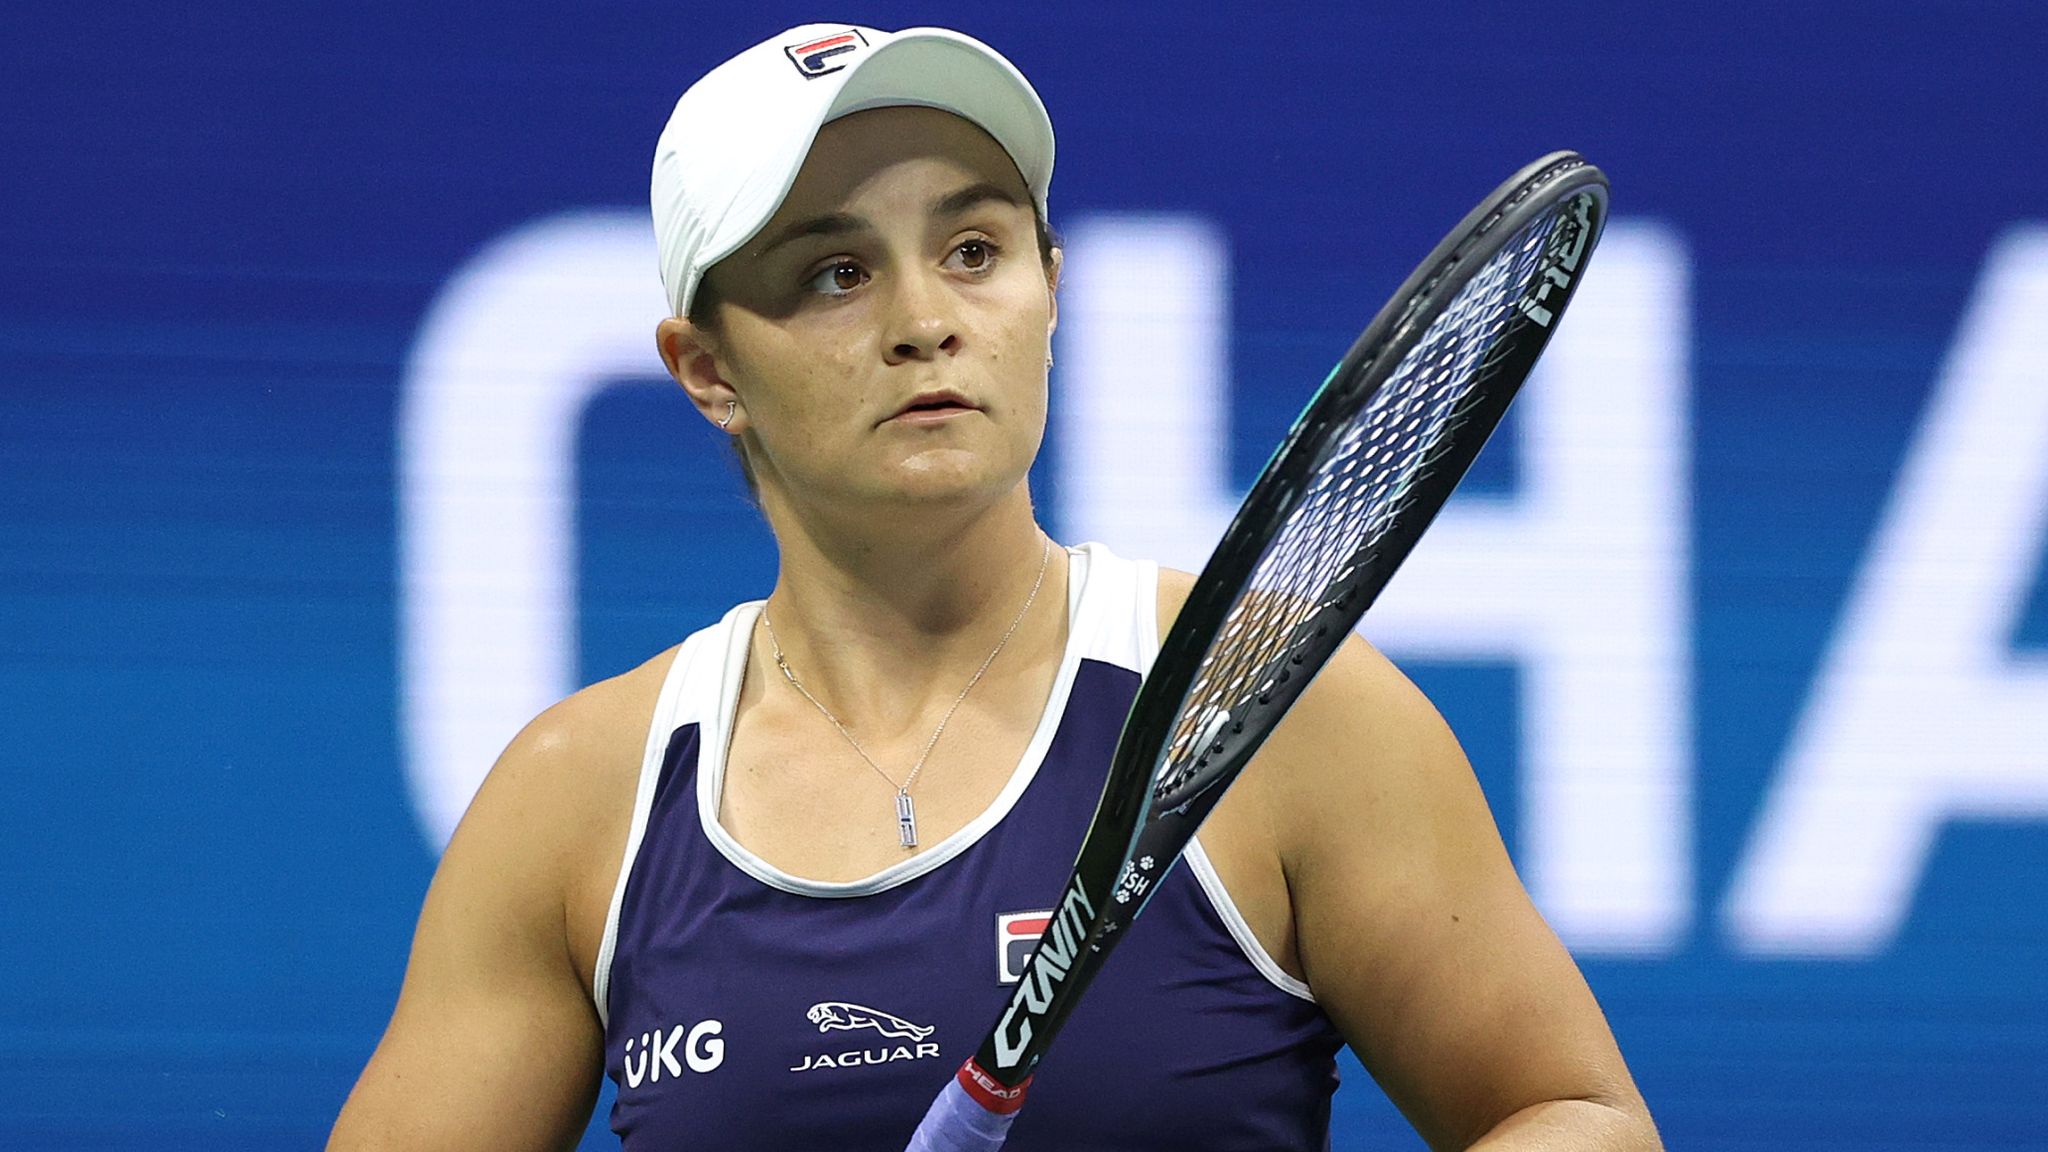 US Open Ashleigh Barty crashes out to Shelby Rogers with Emma Raducanu her next opponent Tennis News Sky Sports